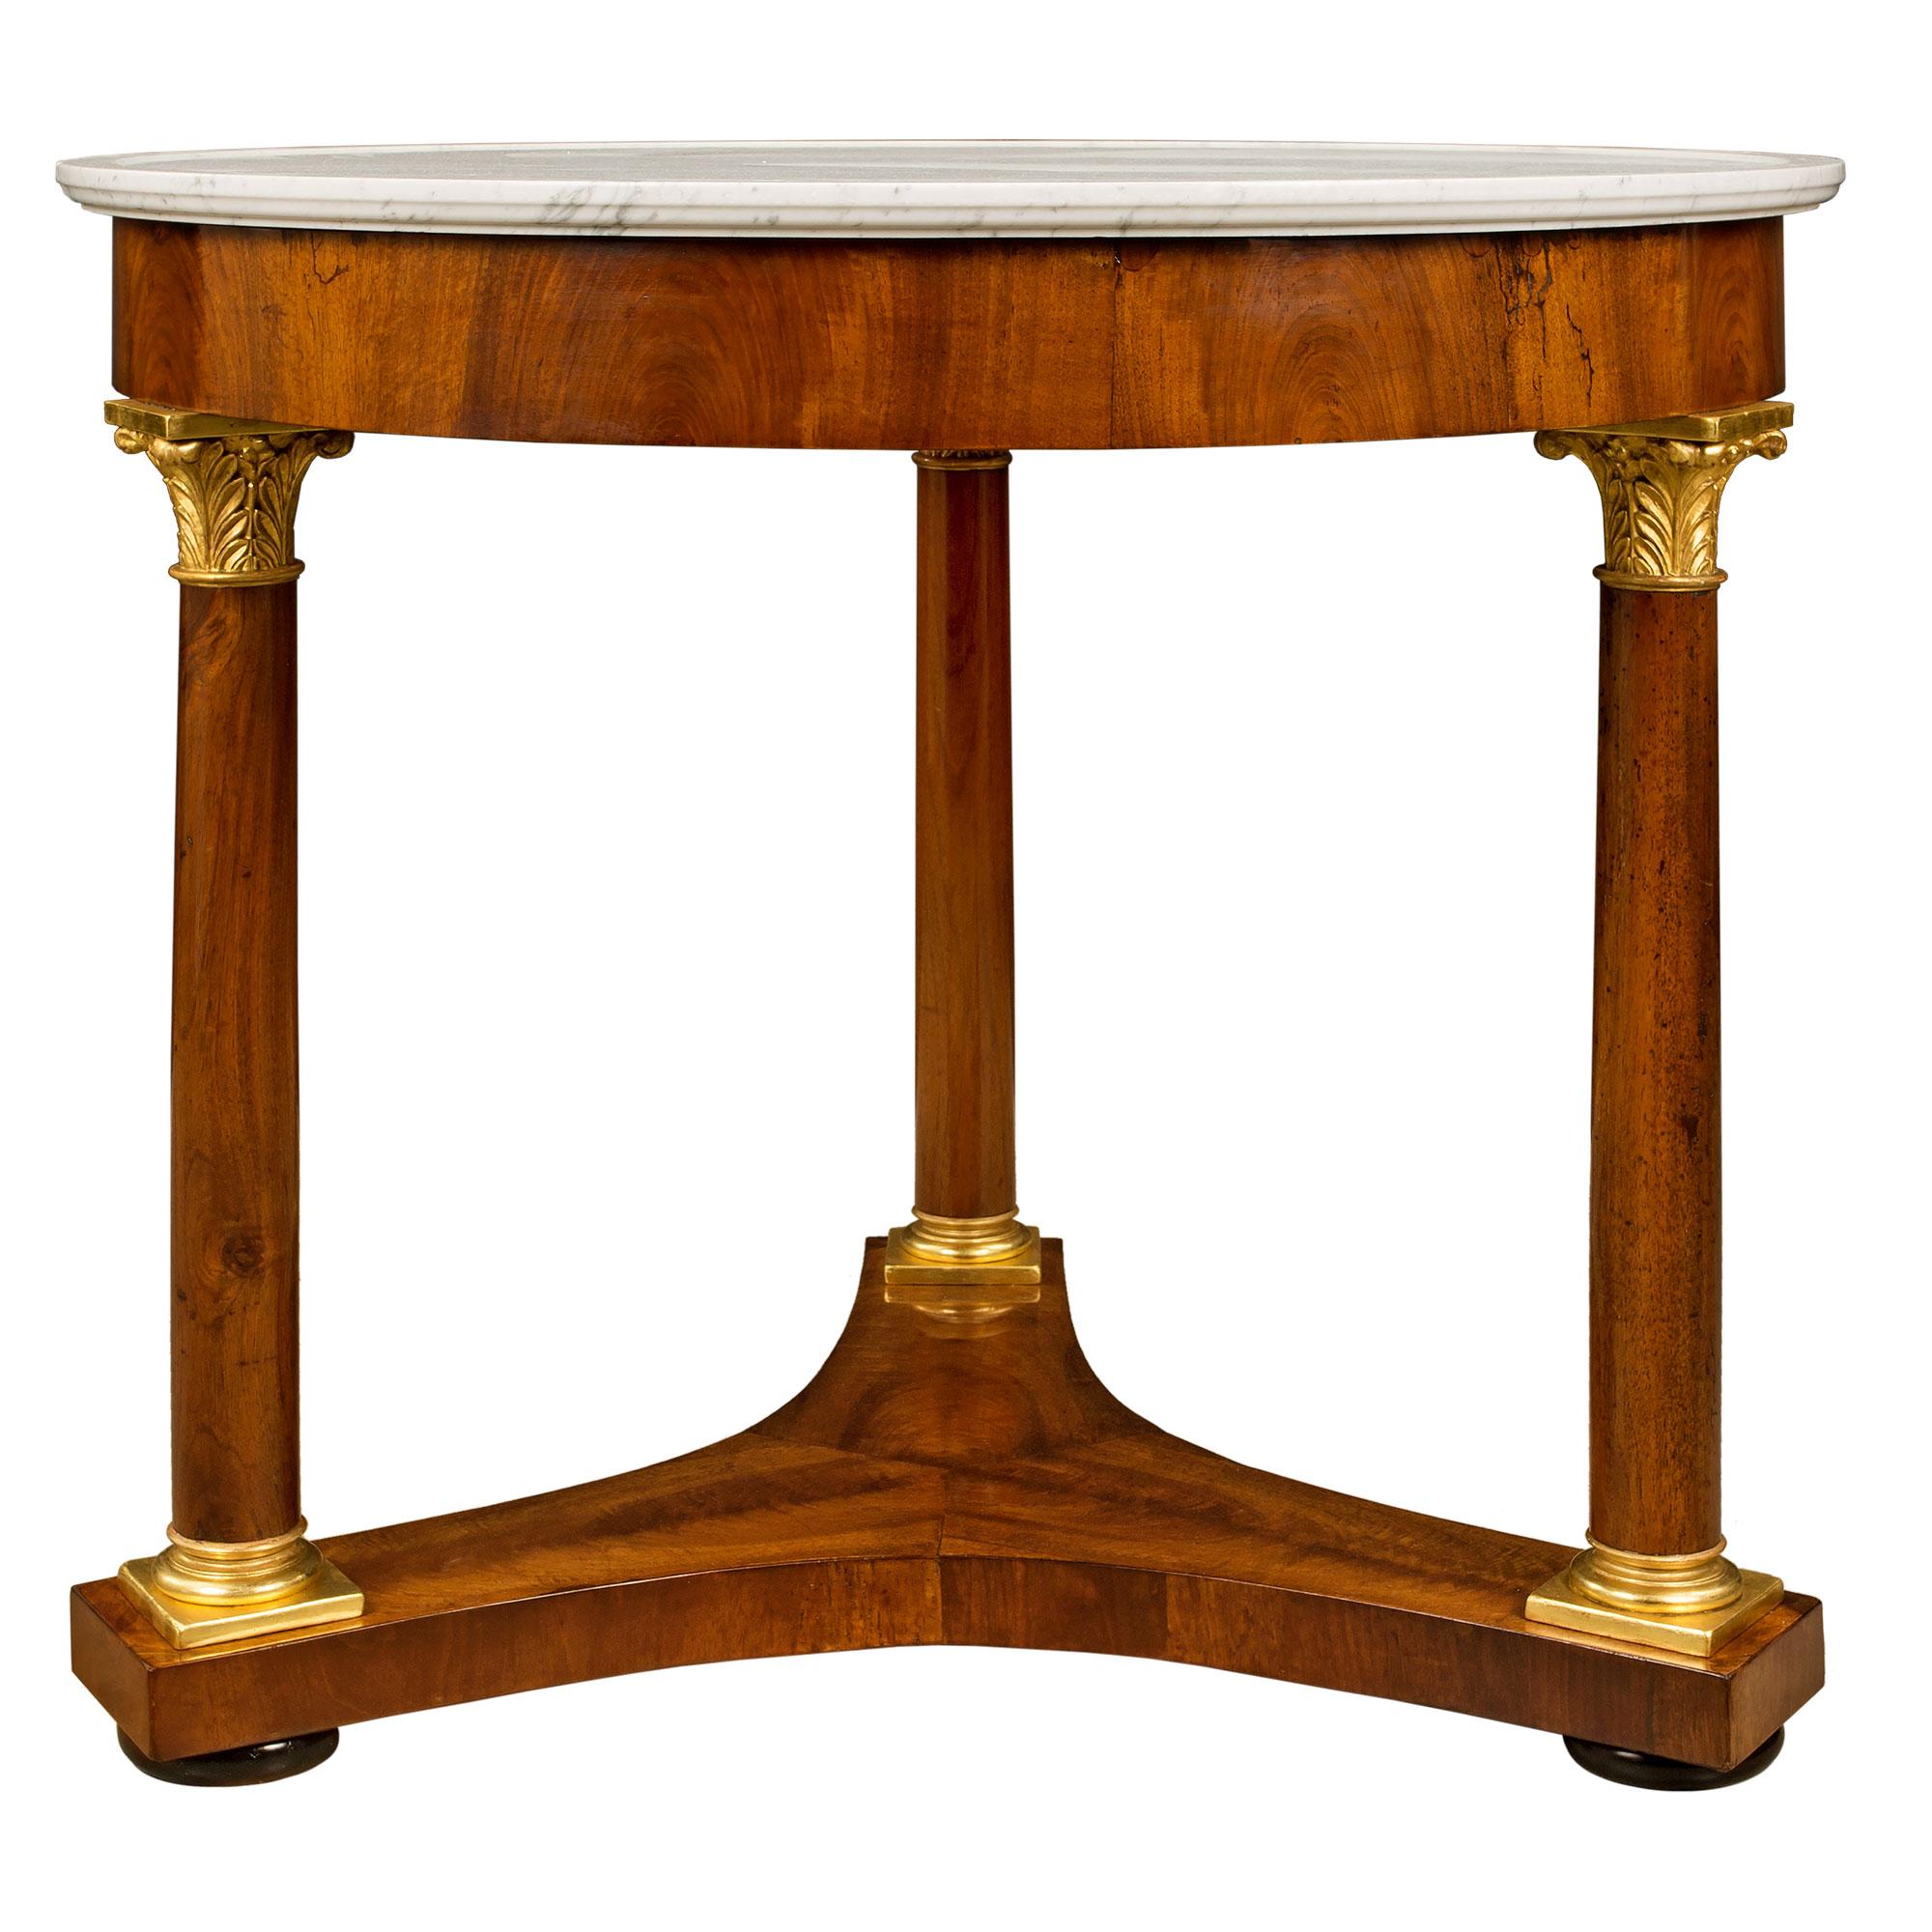 Italian 19th Century Neoclassical Style Walnut and Marble Center Table In Good Condition For Sale In West Palm Beach, FL